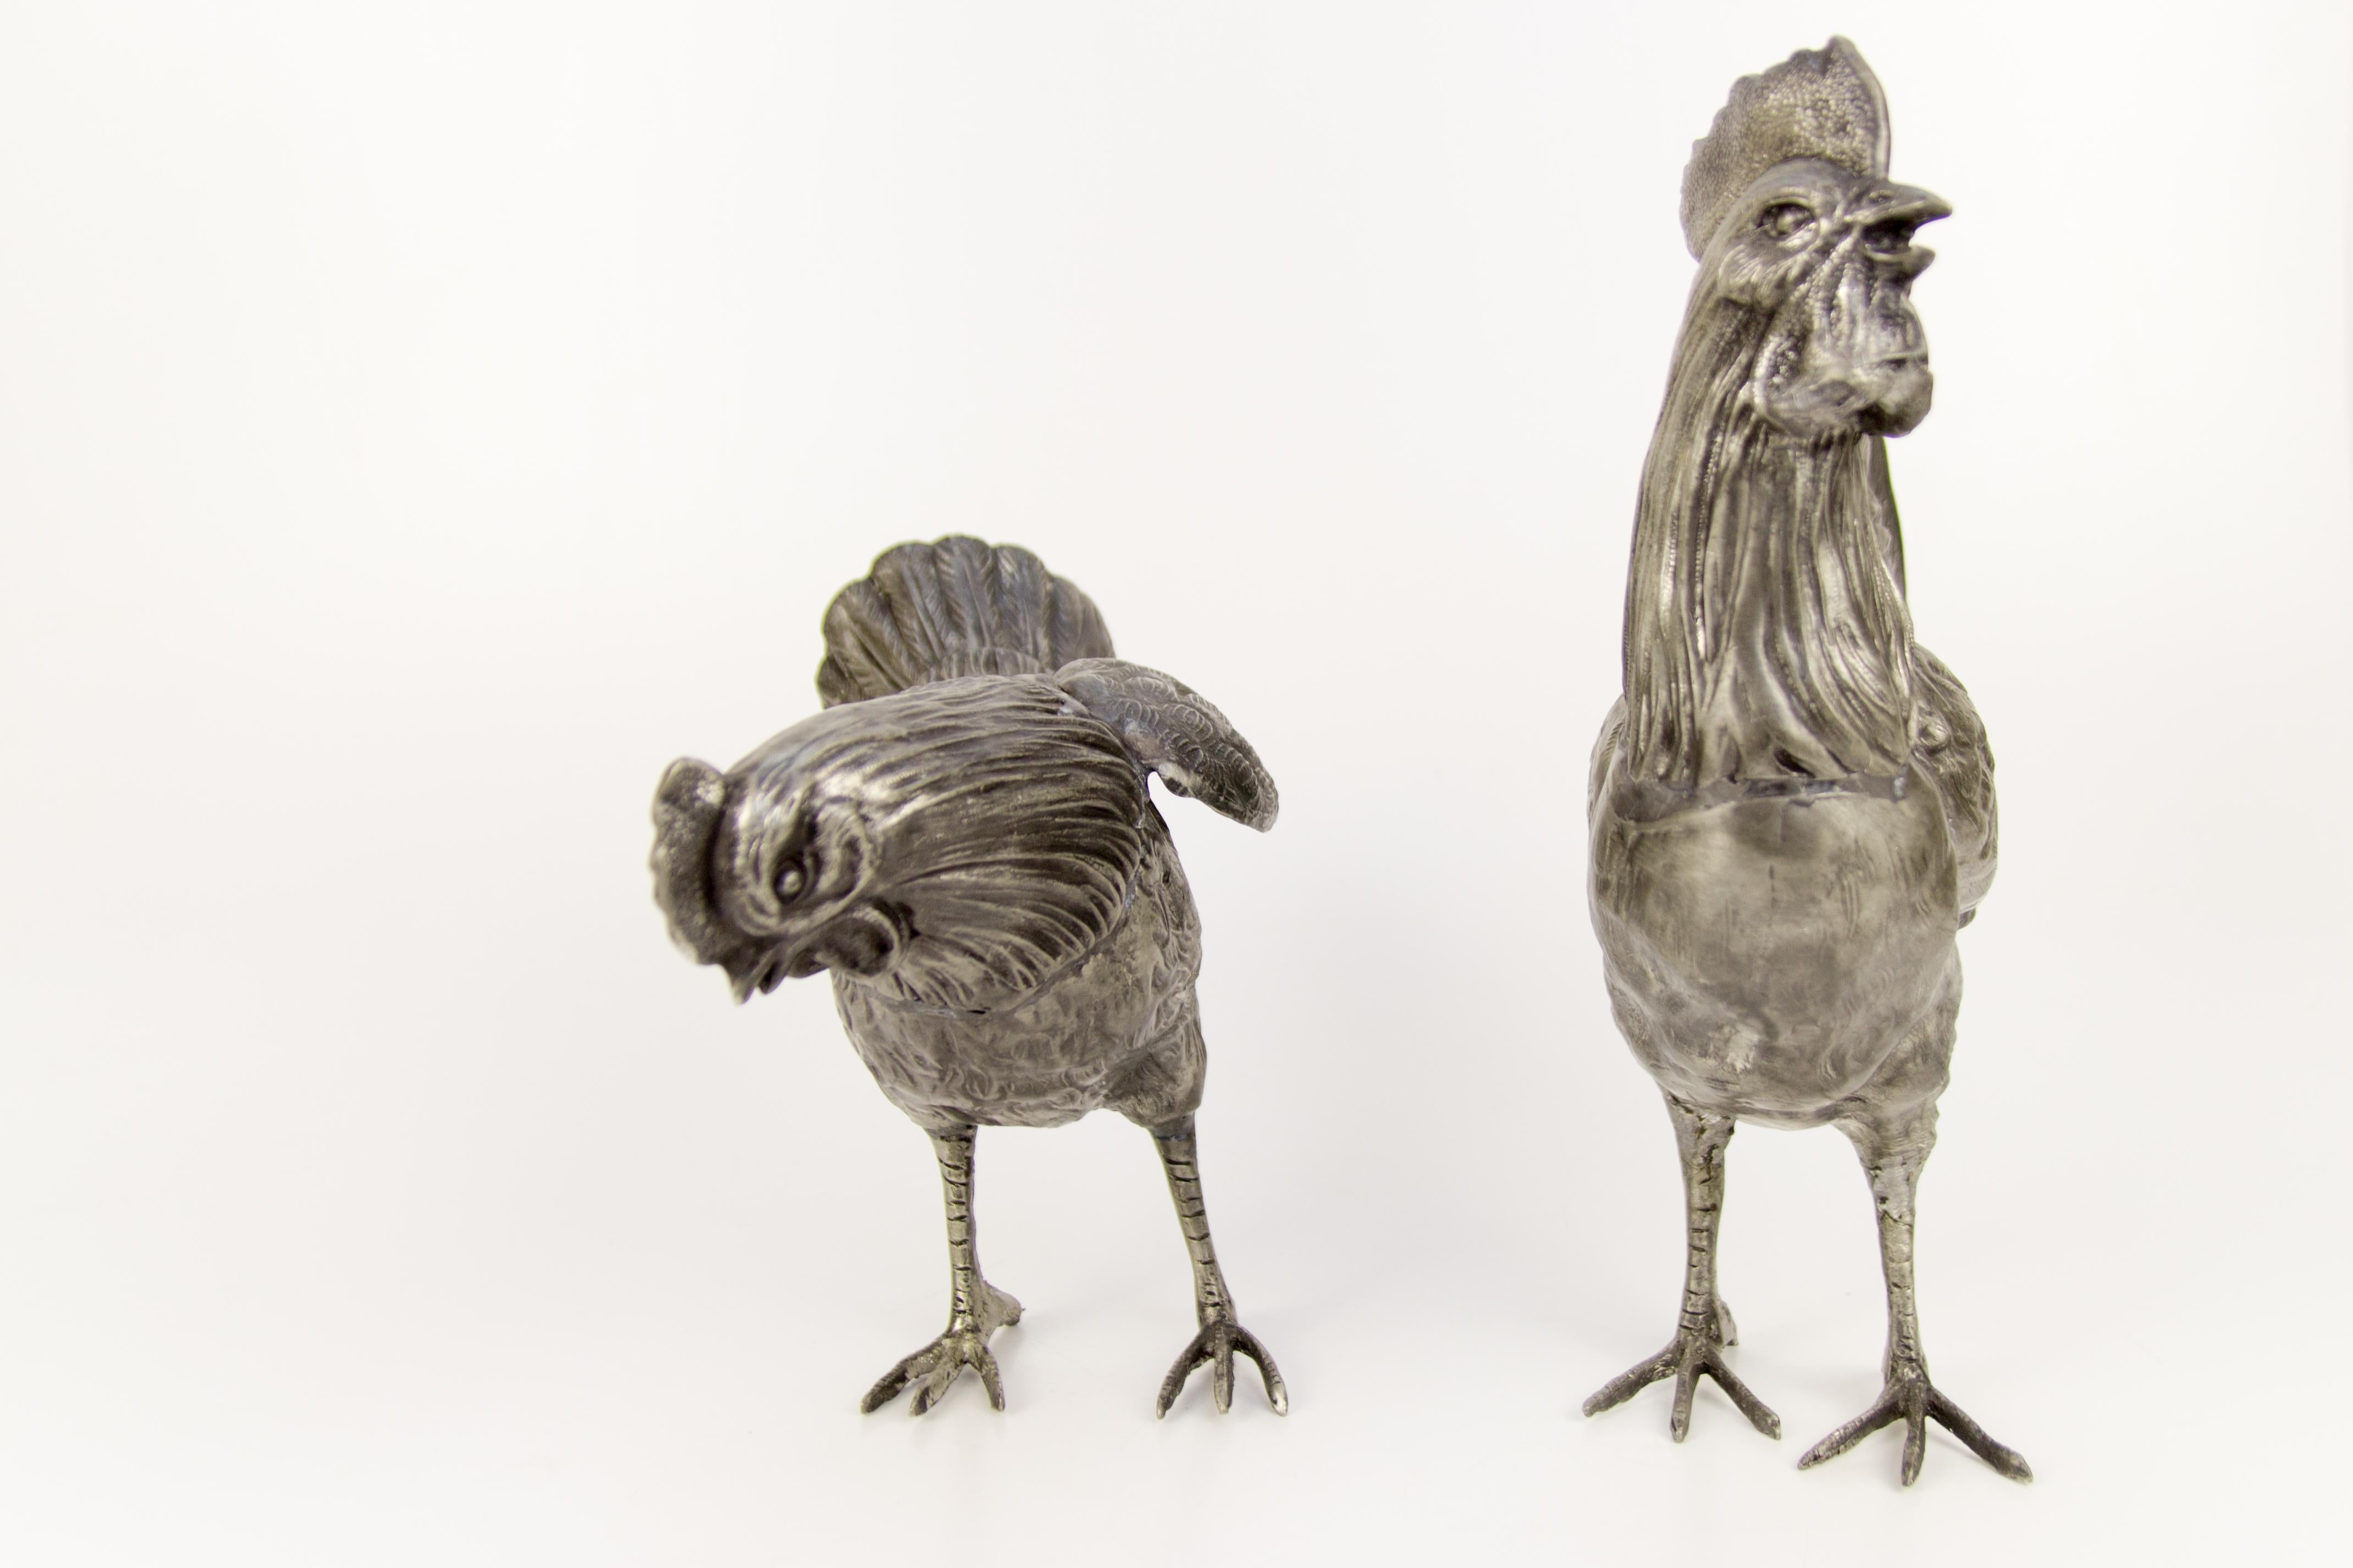 Adorable pair - vintage rooster and chicken sculptures / figures made of pewter in France in the middle of 20th century.
Dimensions: 
Rooster:
Height 31 cm / 12.2 in; width 25.5 cm / 10.03 in; depth 8 cm / 3.15 in.
Chicken:
Height 22.5 cm /